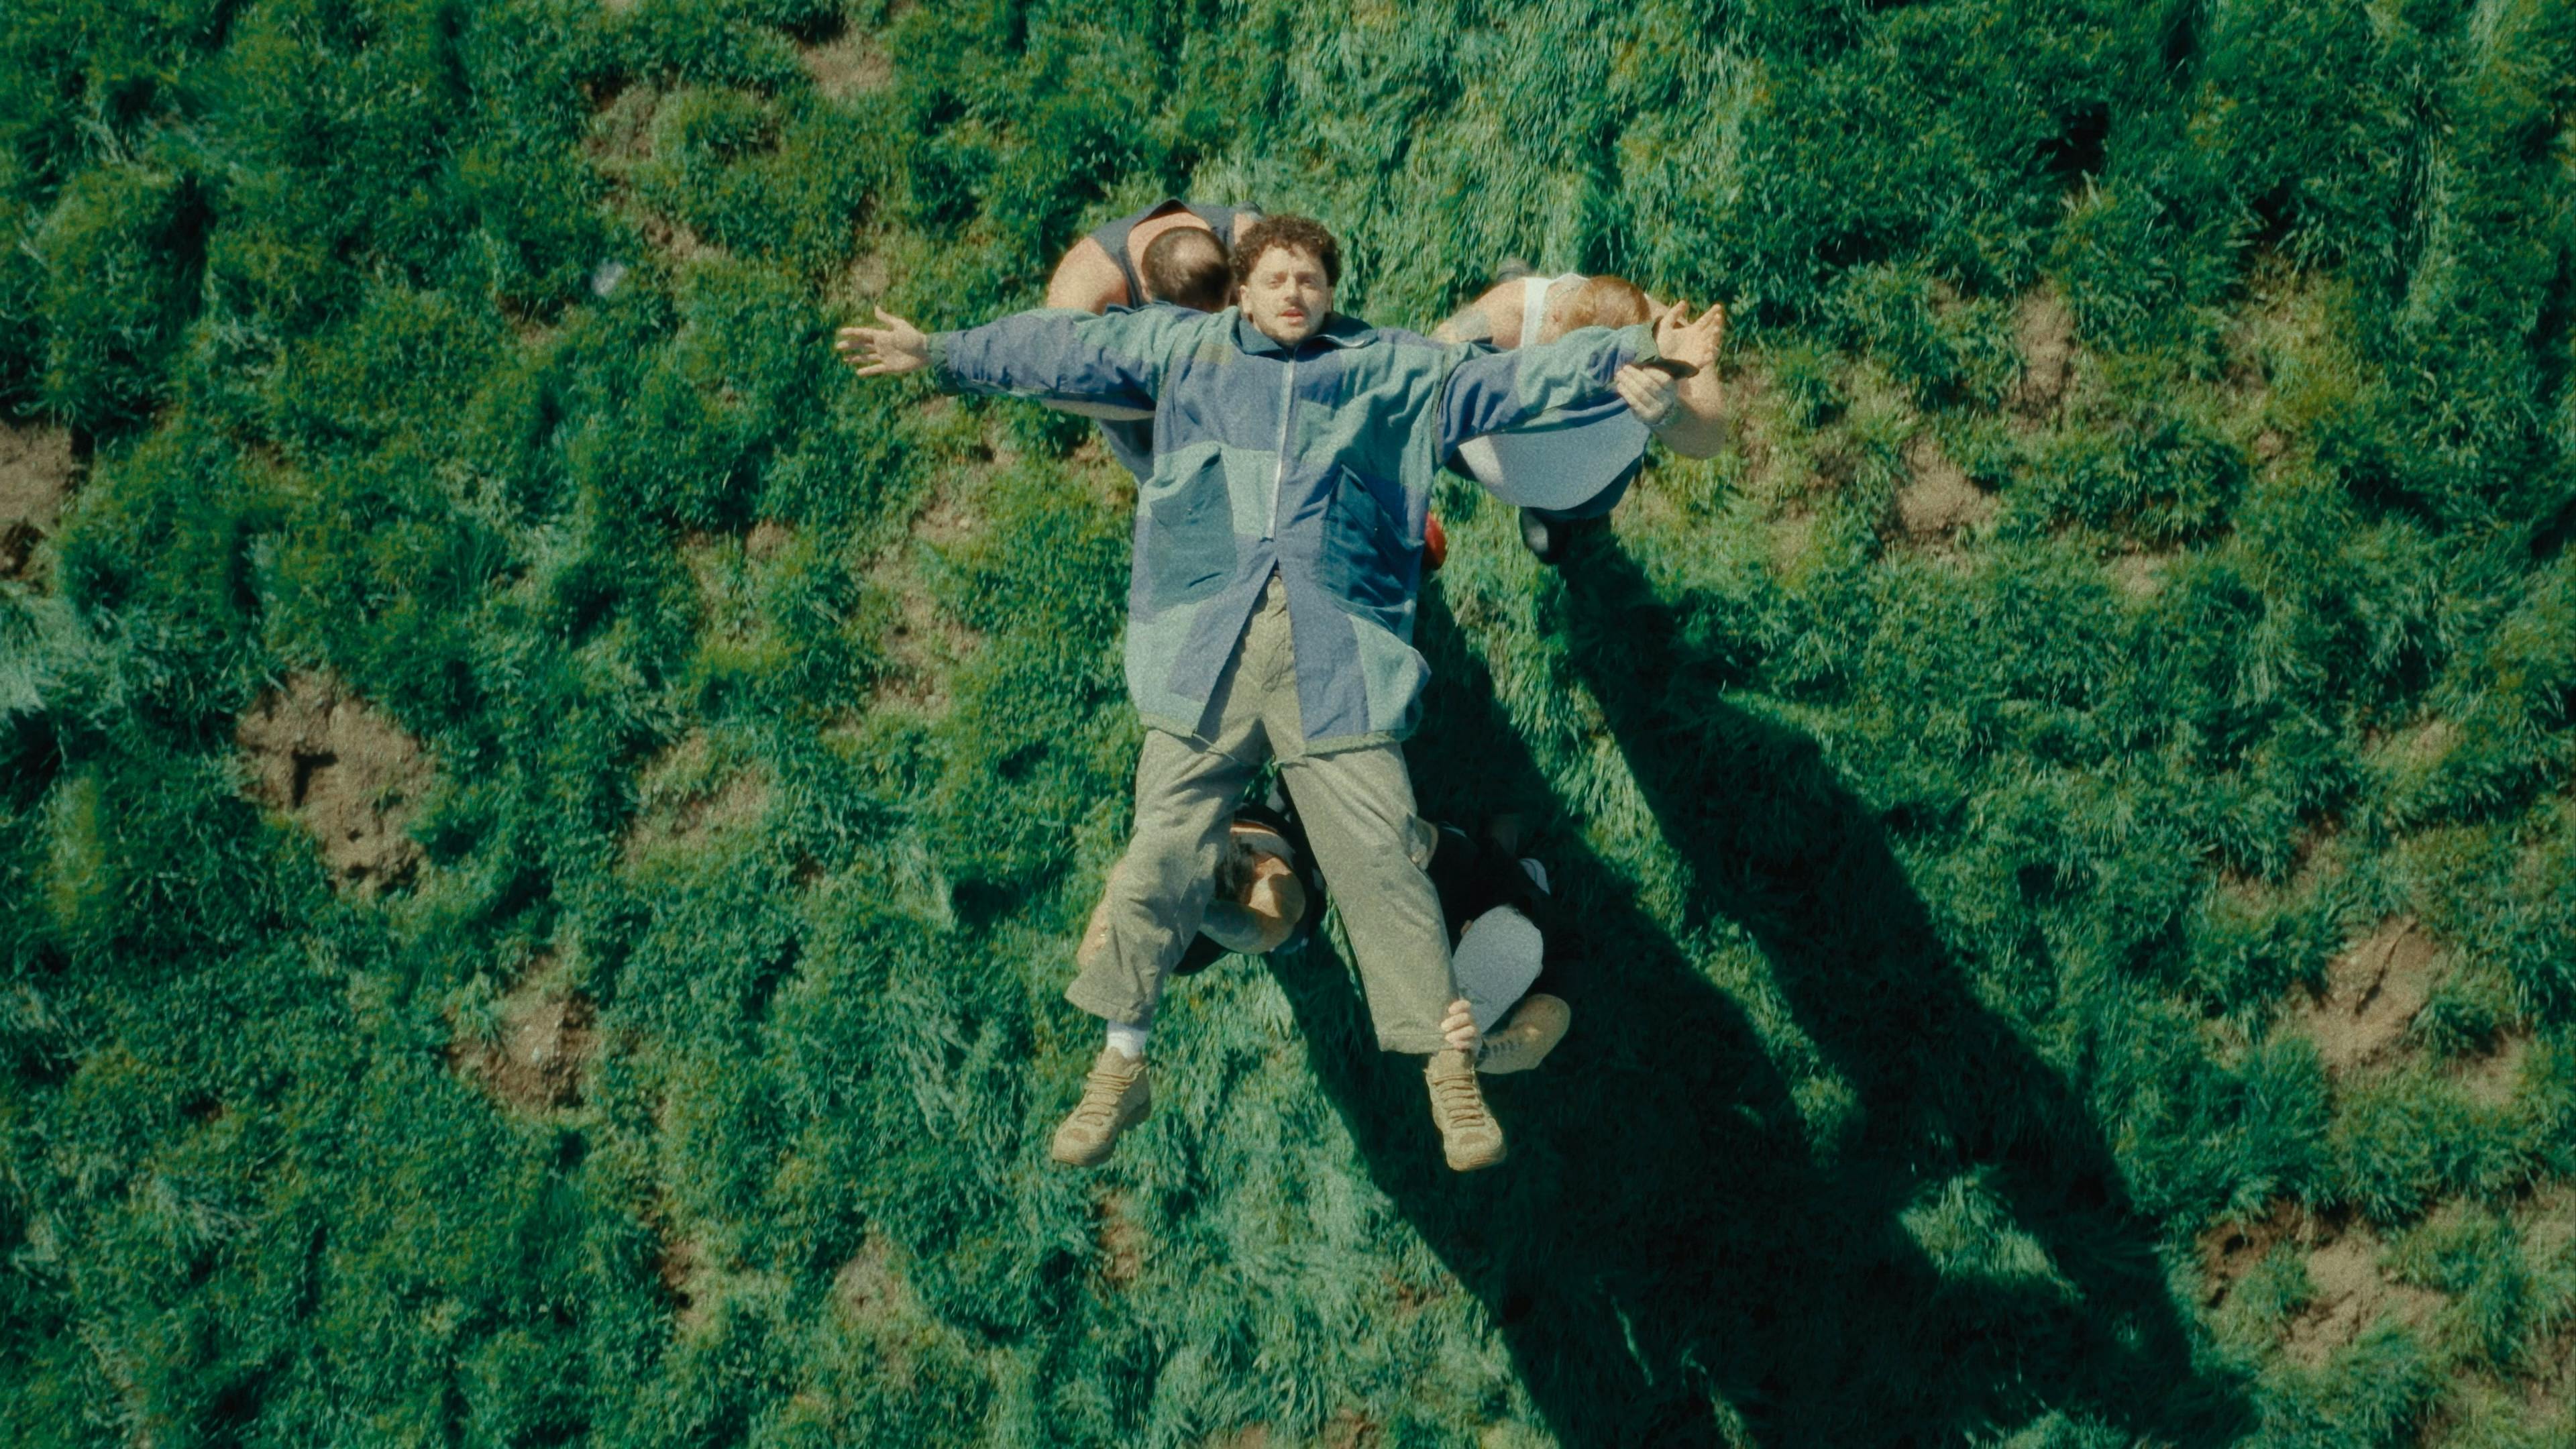 Thumbnail for Grandson's music video 'Eulogy' depicting the artist lying flat on his back, arms and legs outstretched, as he is being carried by four people across a field of lush green grass. Grandson is dressed in a pale blue jacket and beige pants, contrasting with the natural greenery below him.